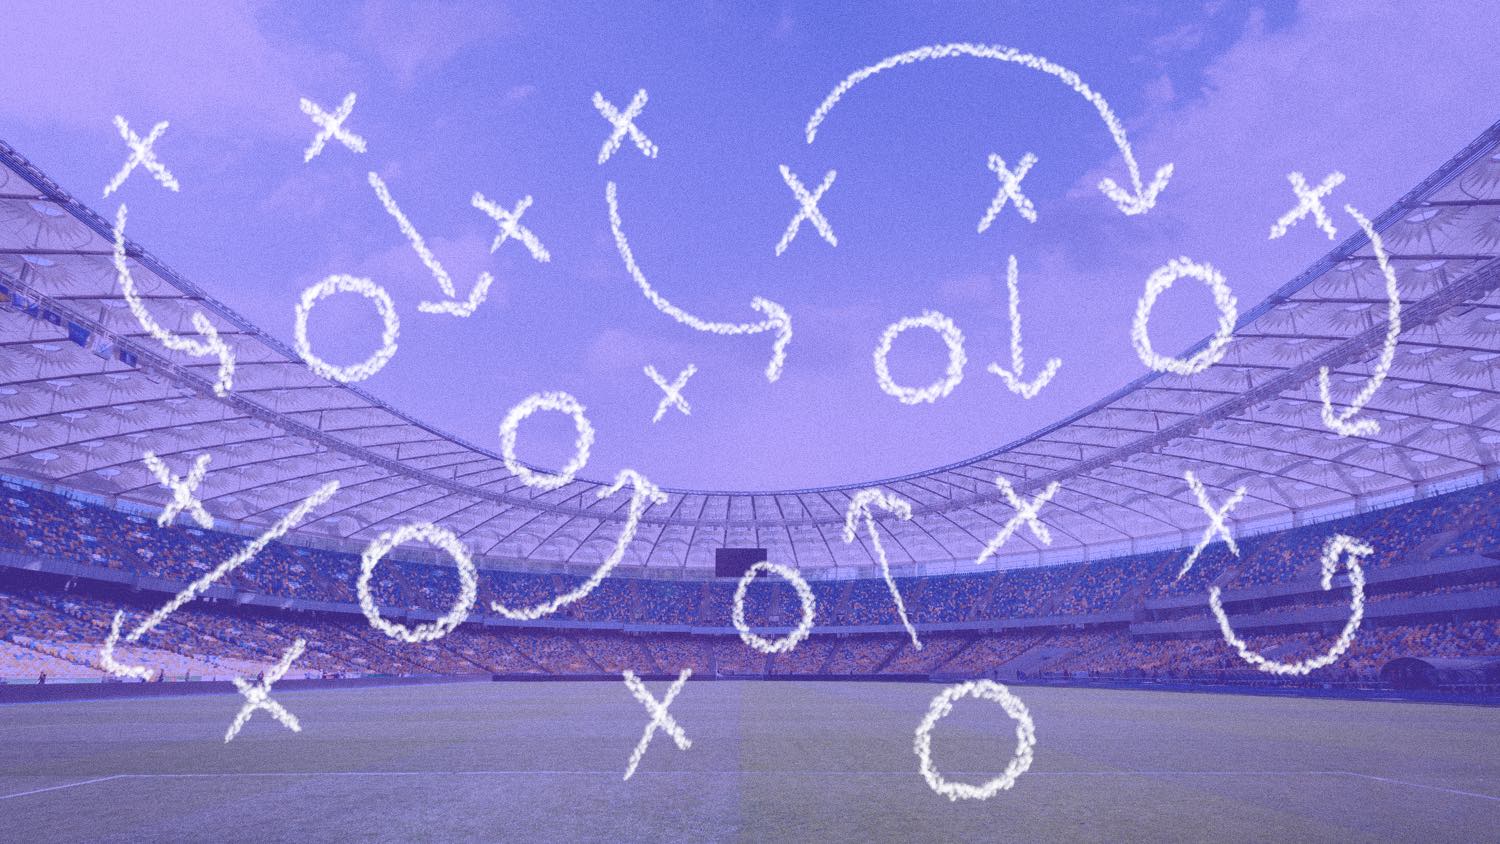 Xs and Os over a football pitch.